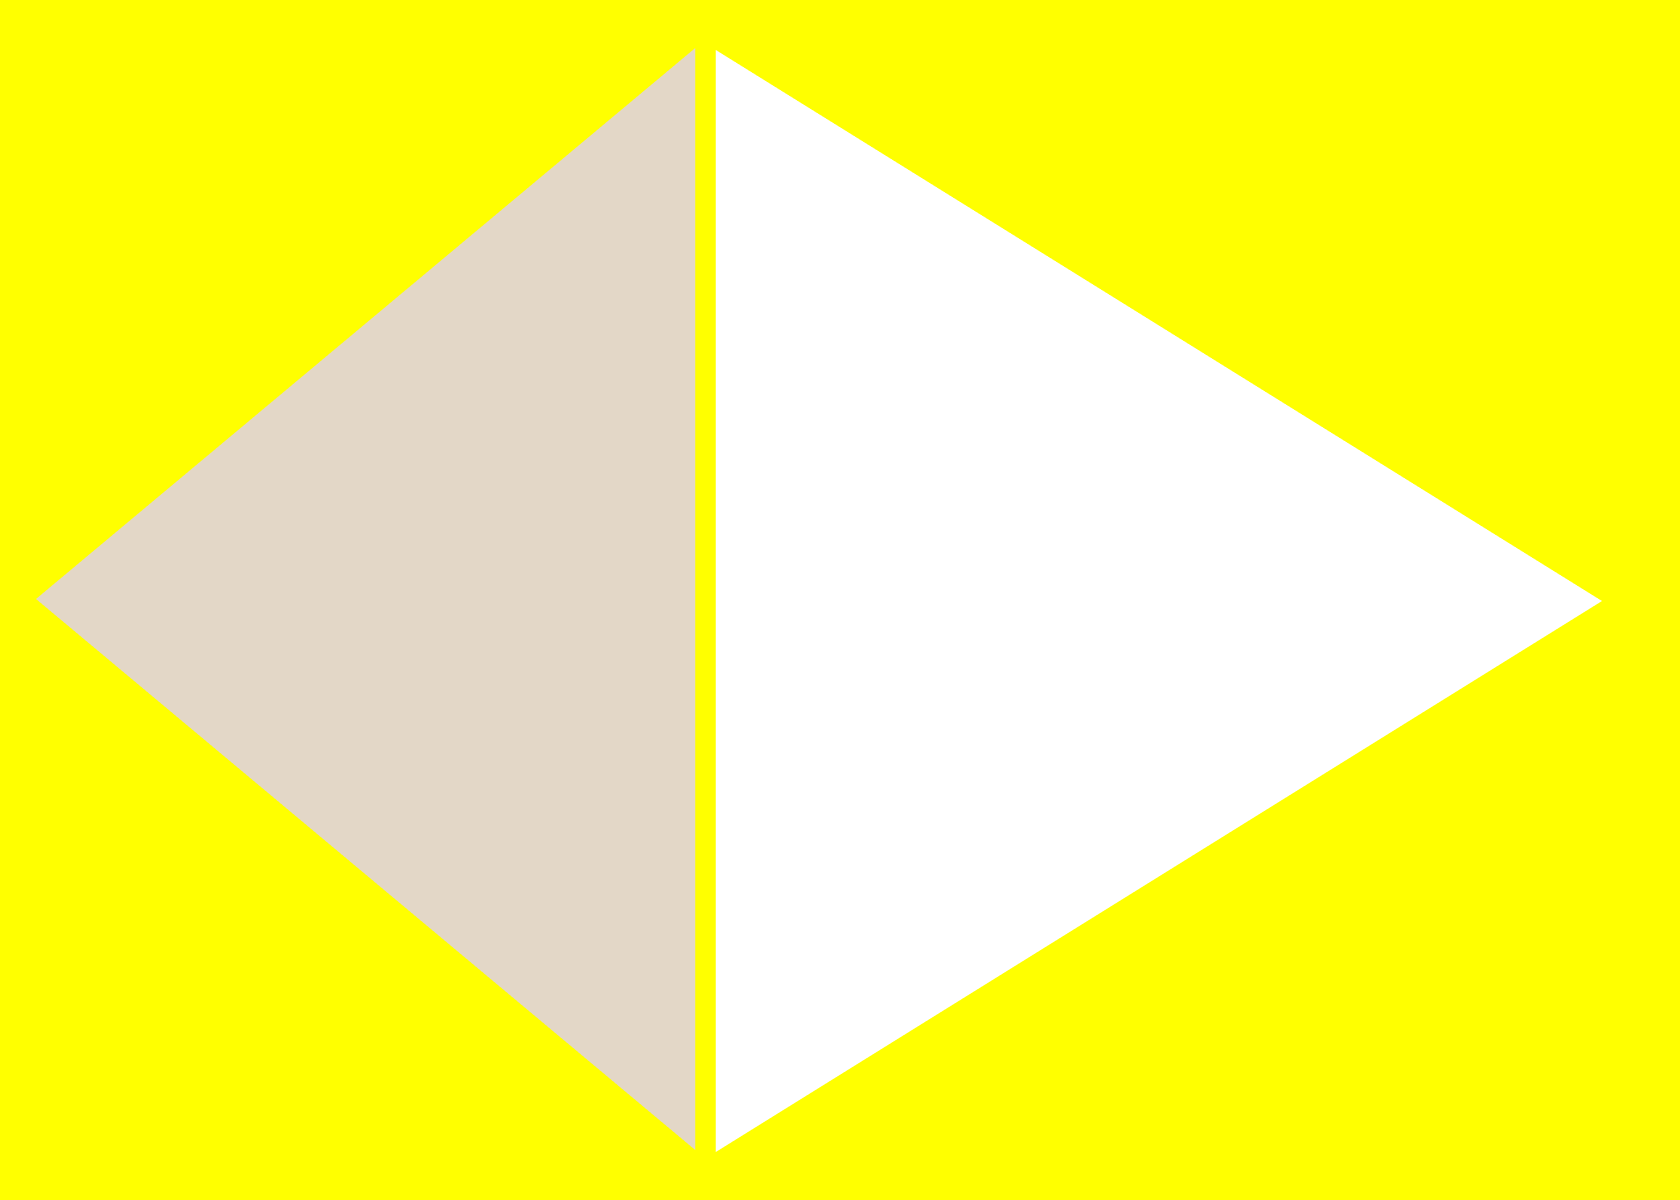 abstract geometric image of two triangles